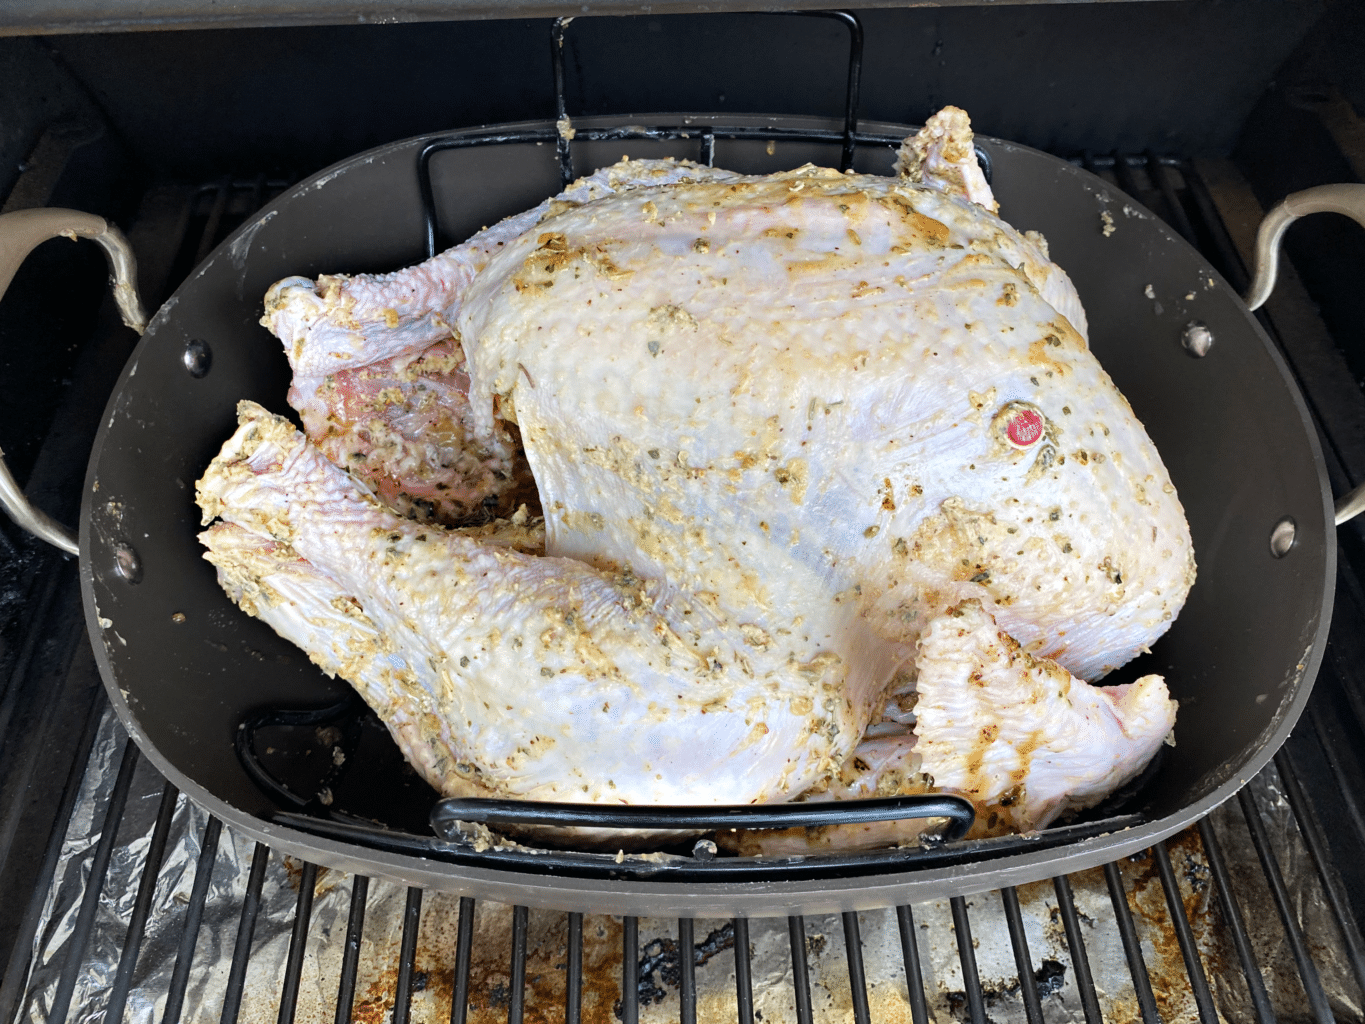 Smoked Turkey Recipe No Brine Juicy And Delicious From The Traeger